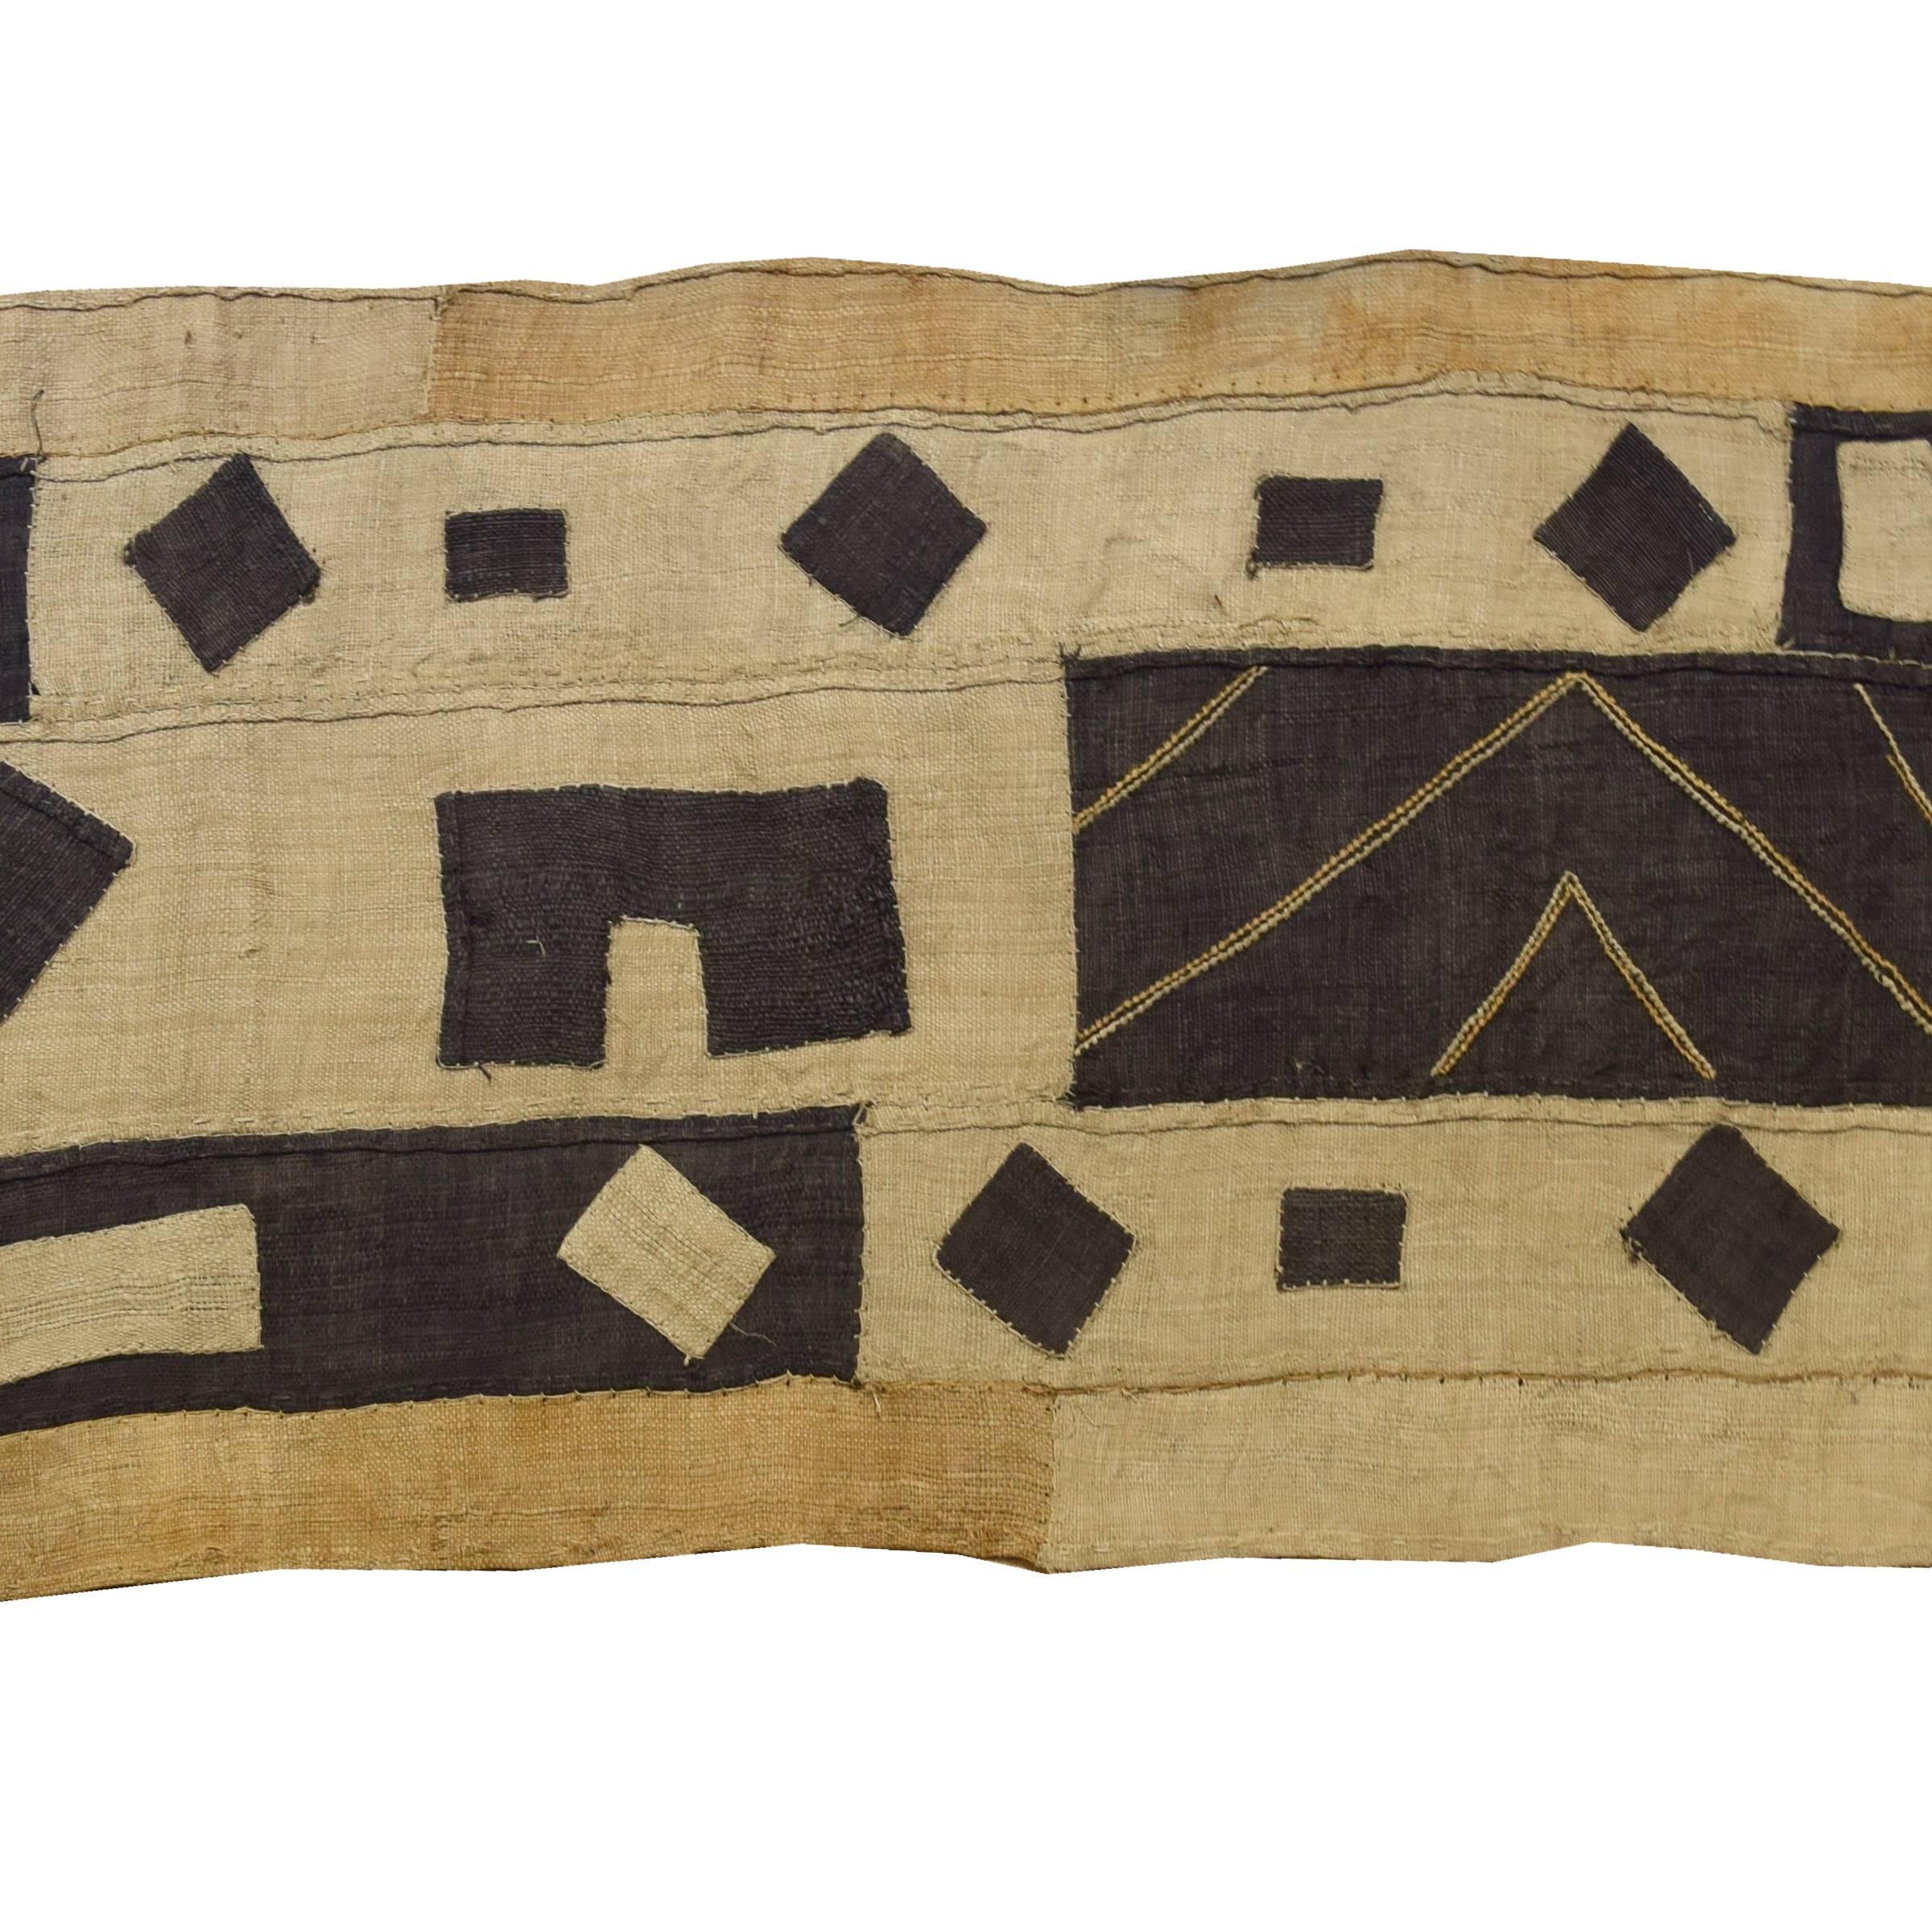 A beautiful handwoven raffia Kuba cloth from the Democratic Republic of the Congo with a great geometric pattern. Kuba cloths are worn by men during certain dance ceremonies.